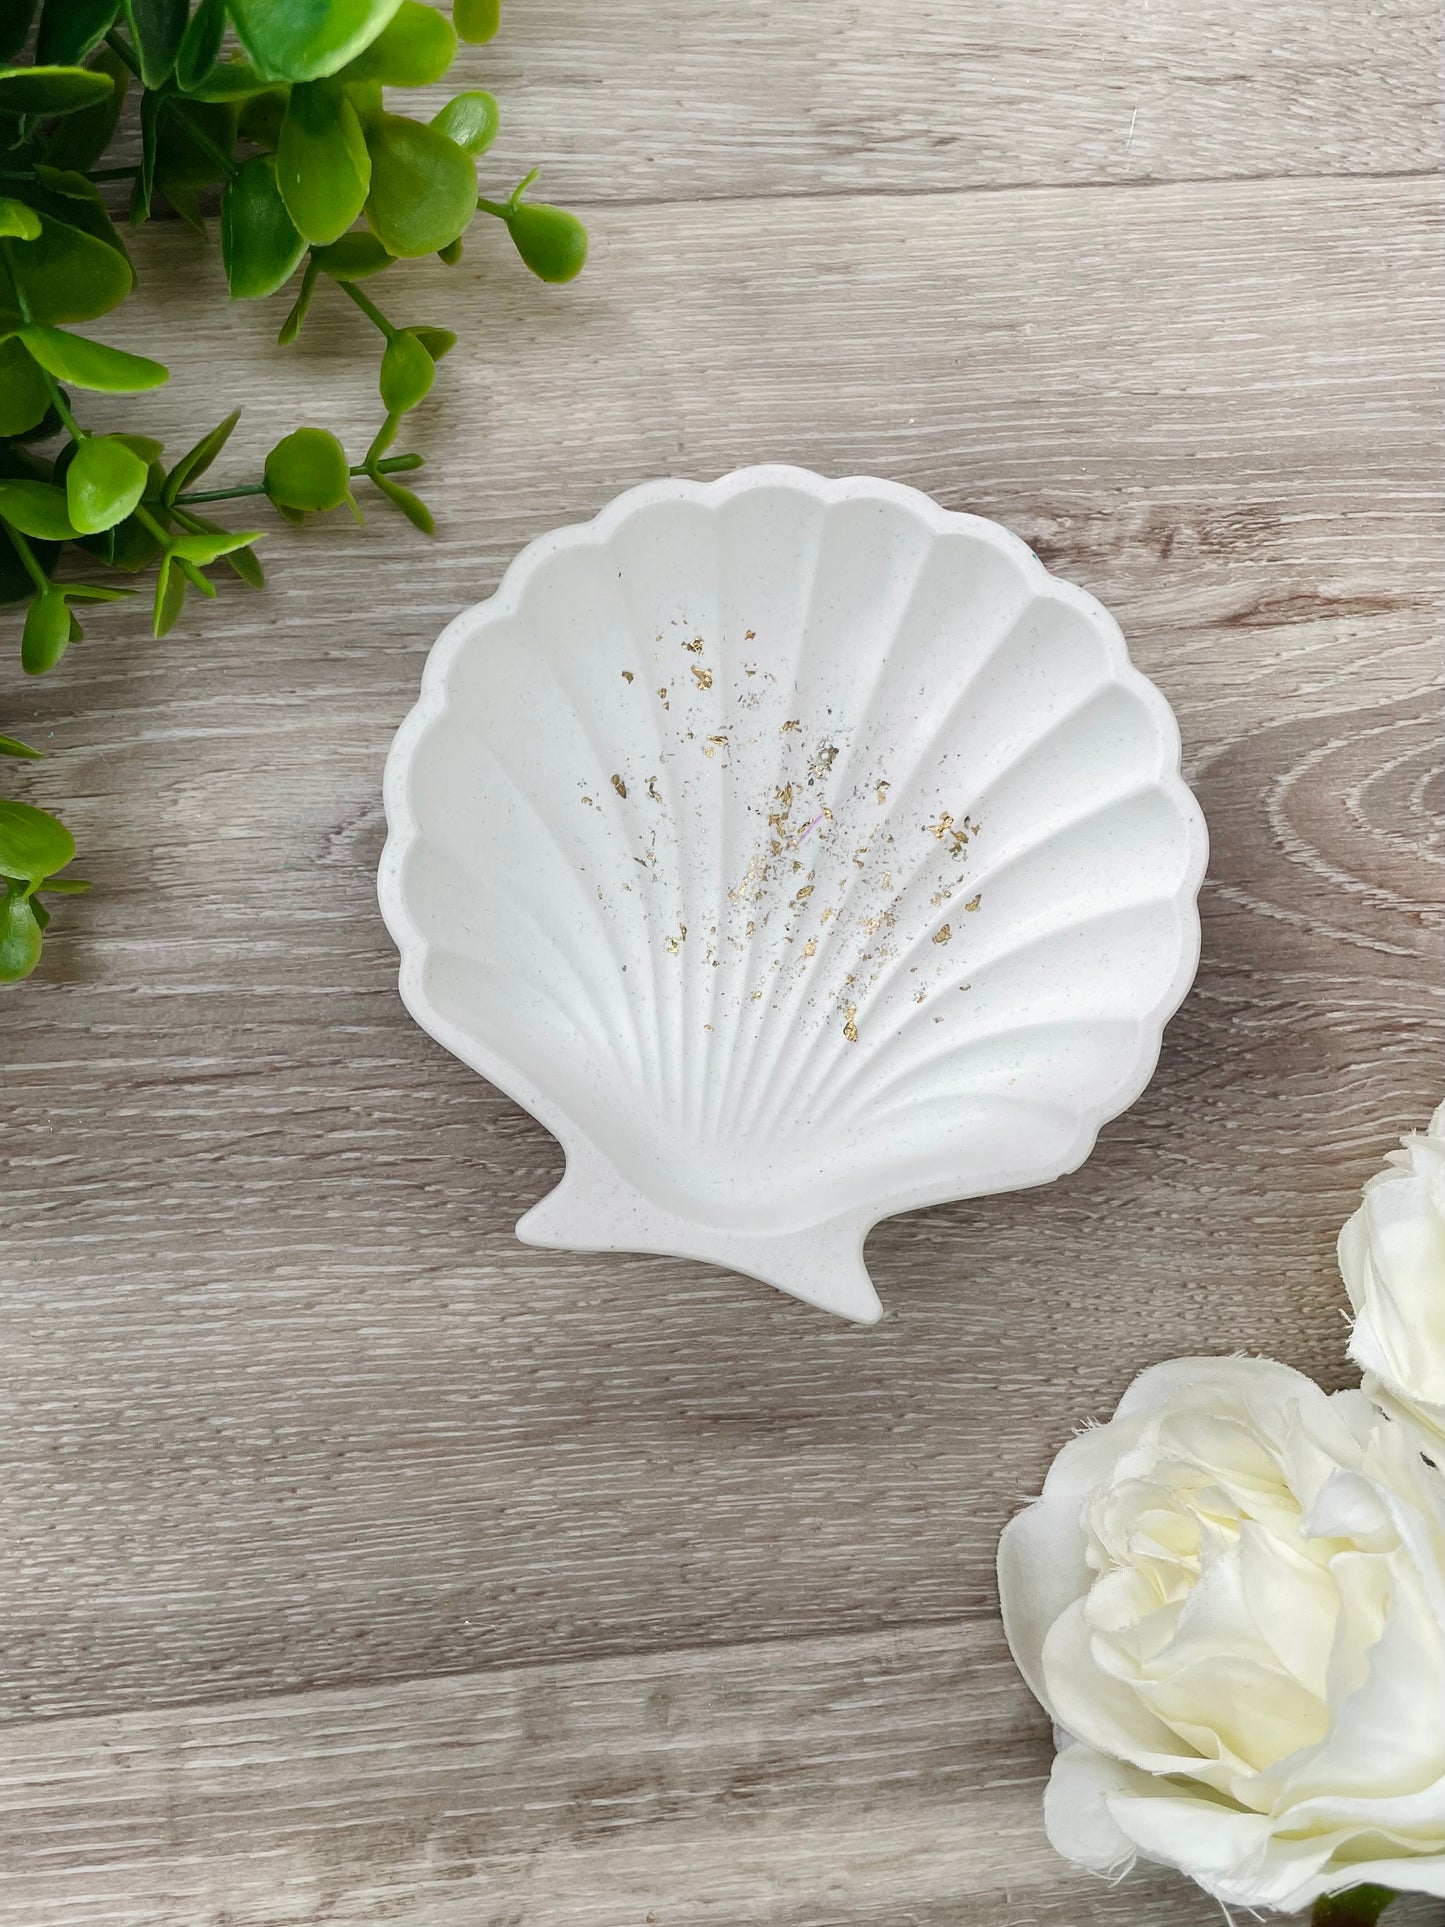 Clam shell bowl ✨  Natural white with gold leaf flakes  Approx size 95mm x 180mm (9.5cm x 18cm)  Unlike our epoxy resin products, this beauty is made out of eco resin with a more natural, rustic final finish.  This is a great sized to use as a catchall for jewellery or hair accessories!  Handmade in Waikato, New Zealand.